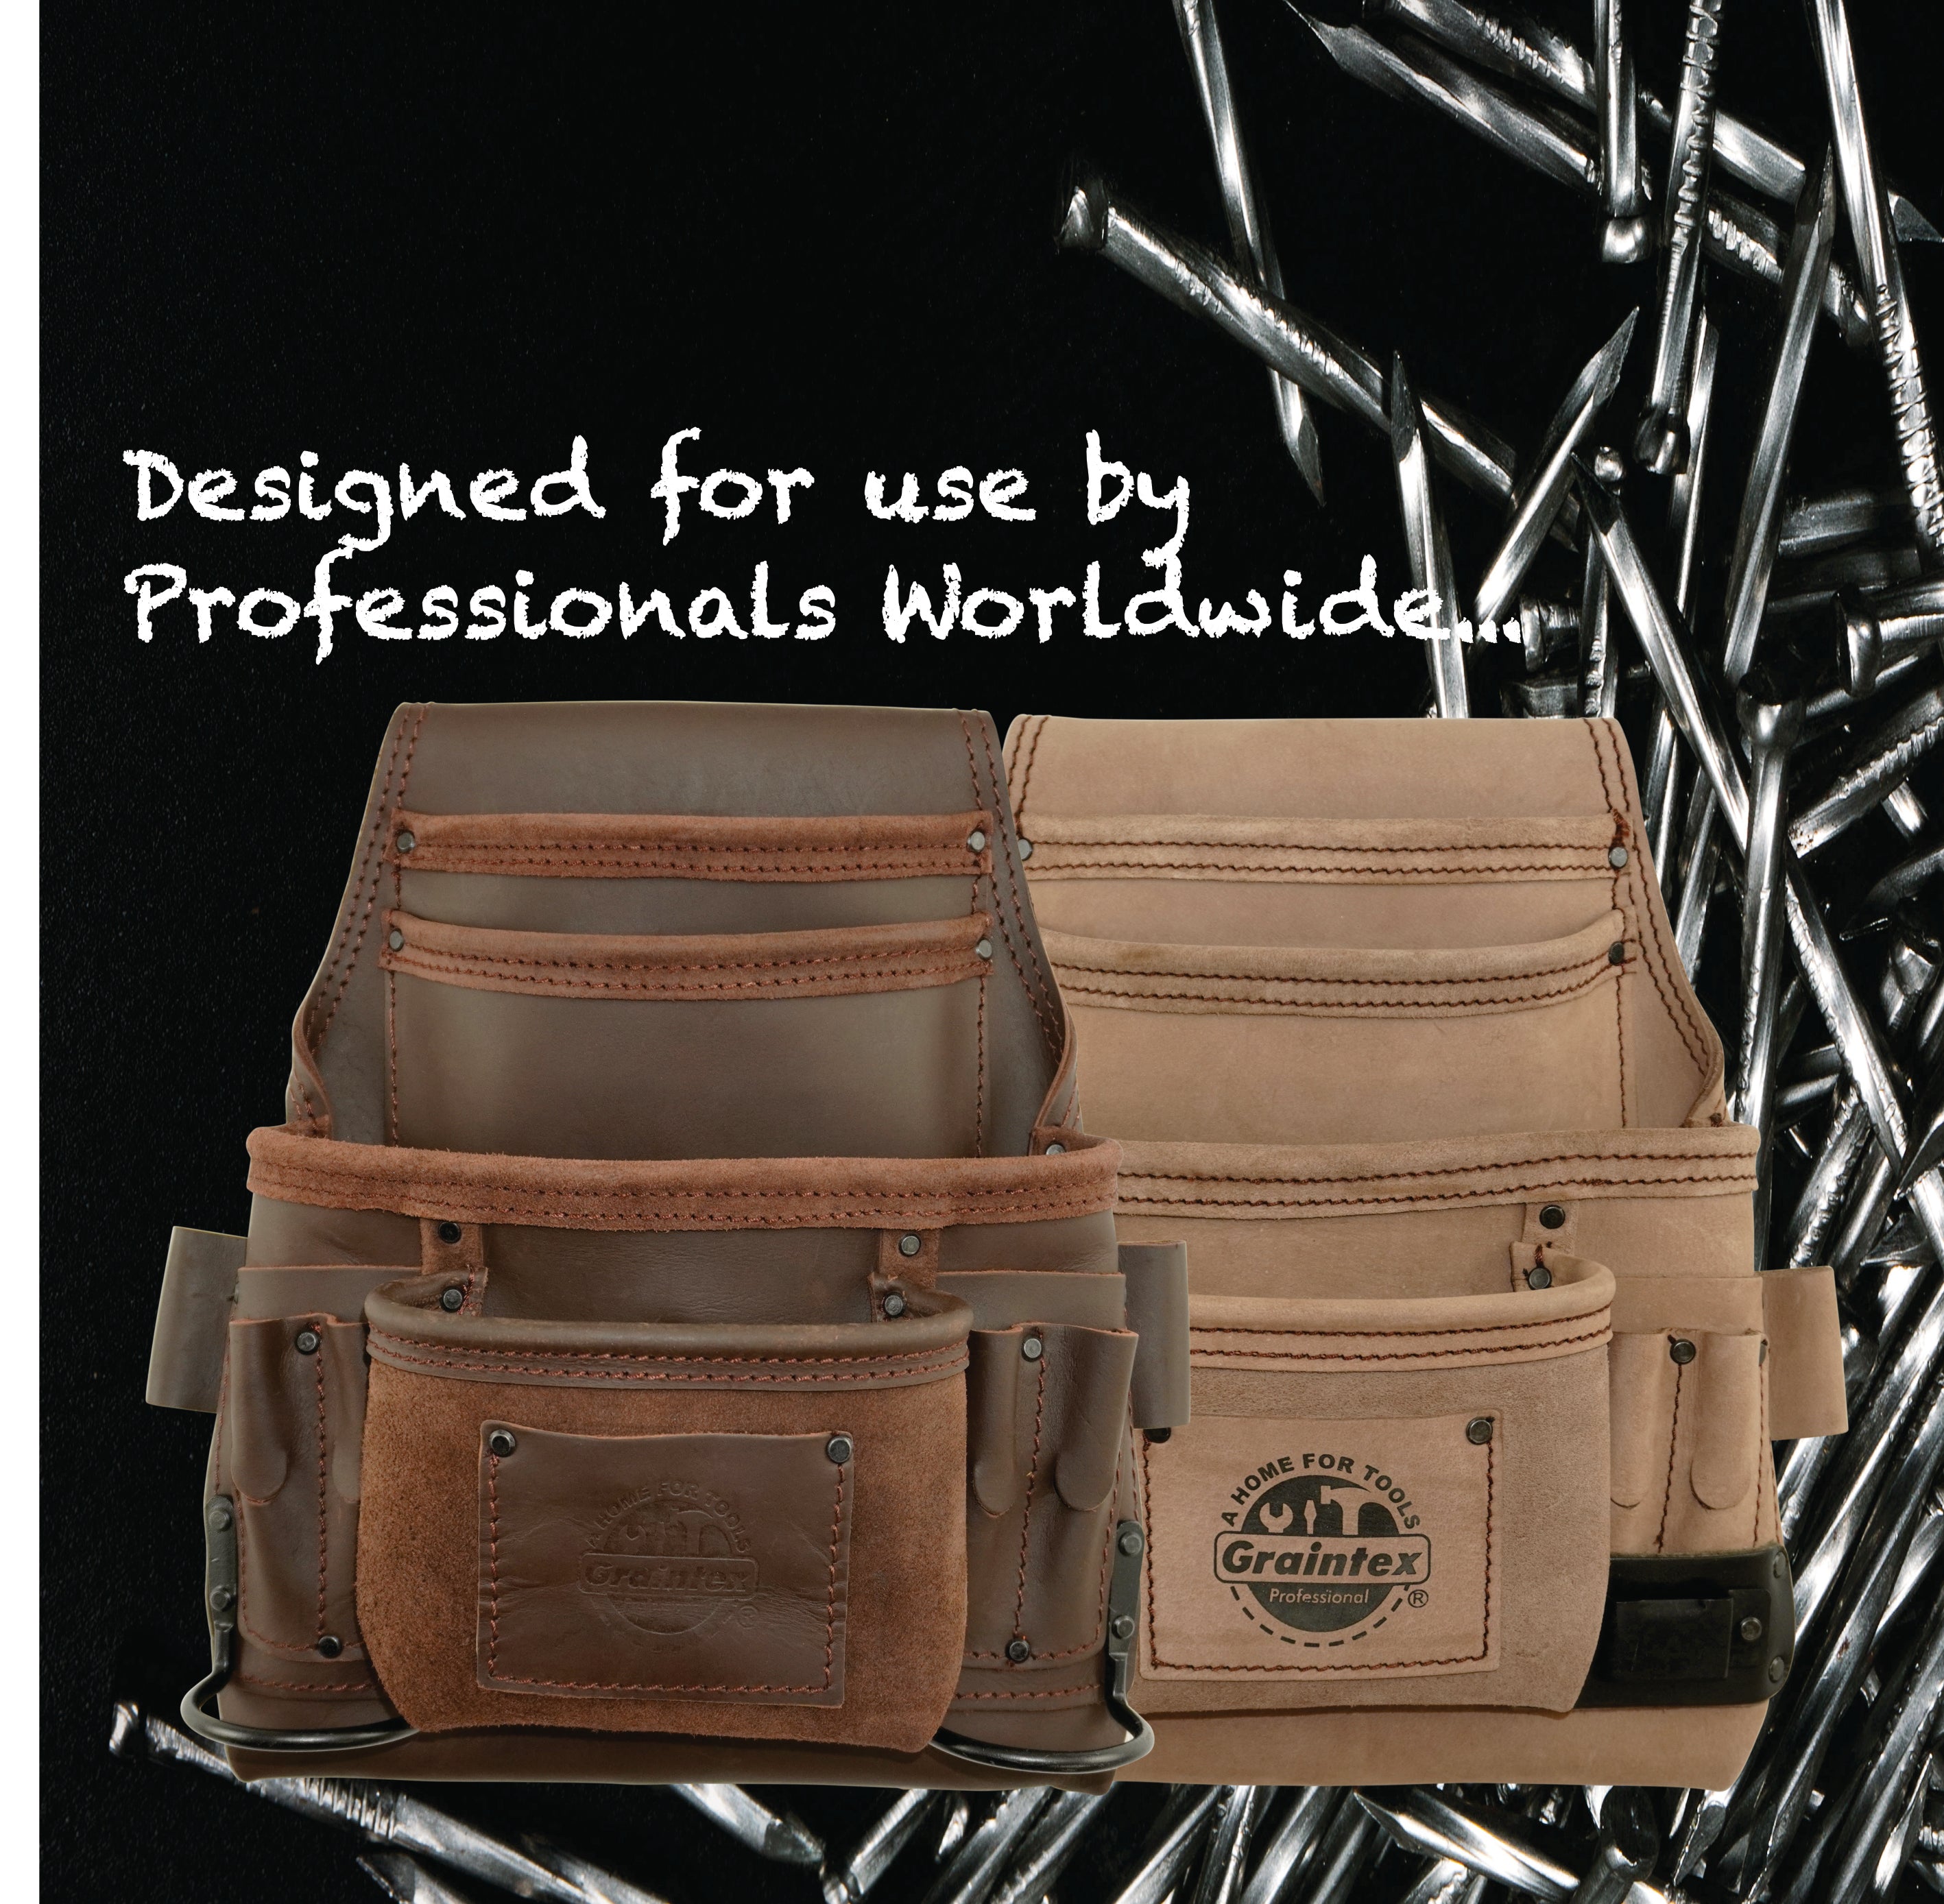 Graintex | Quality Tool Belts, Pouches, Buckets, Holders, Aprons